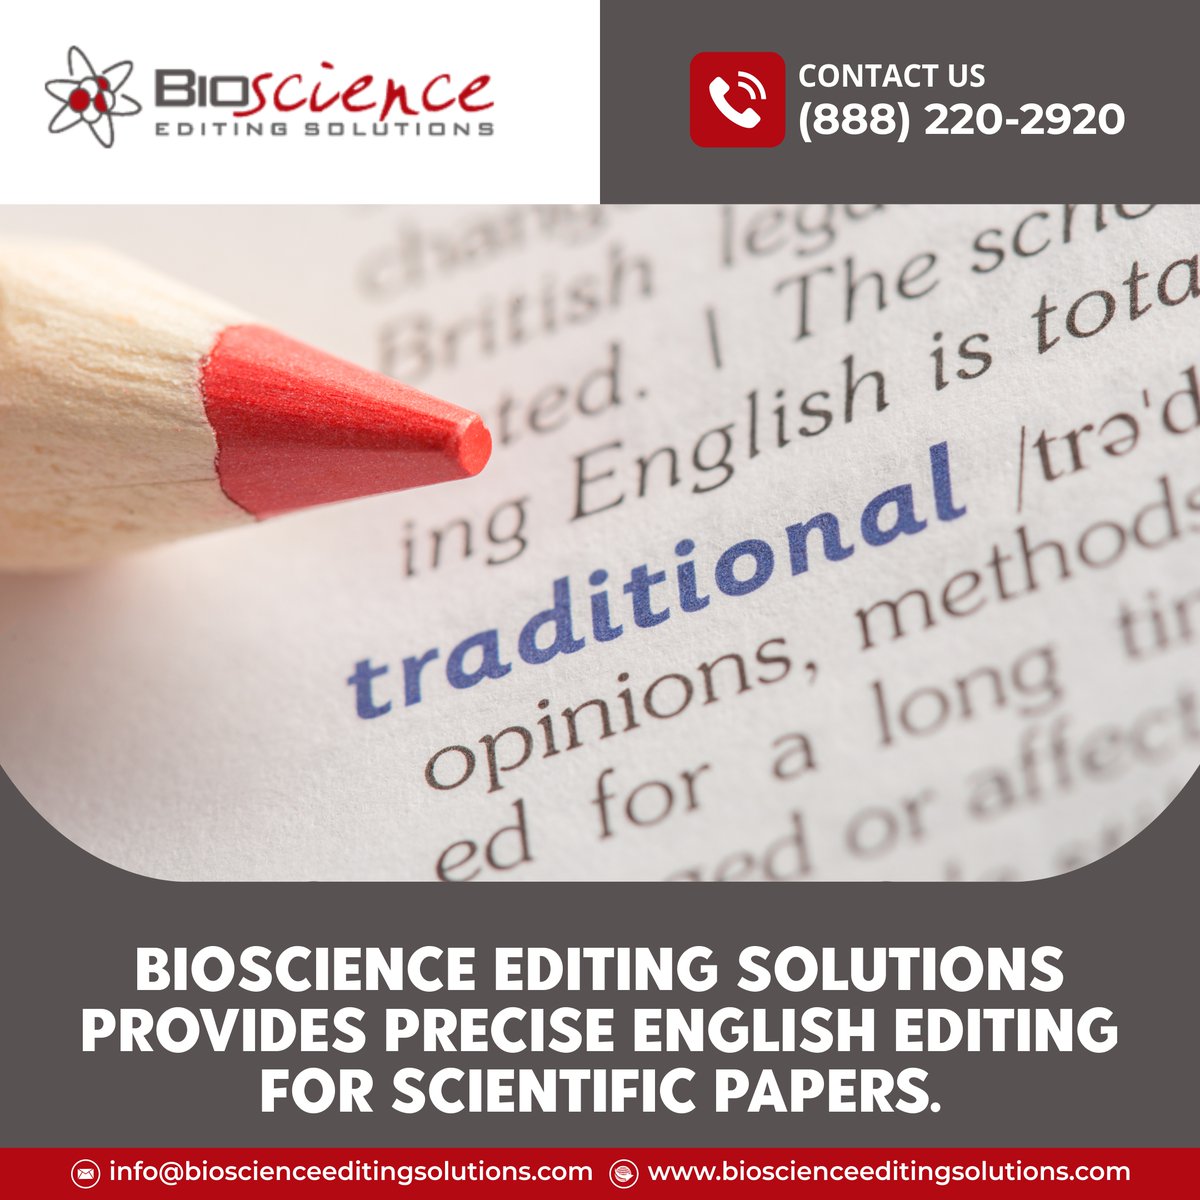 Bioscience Editing Solutions offers accurate English editing services for scientific papers. Their team of expert editors provides precise editing of manuscripts, grant proposals, and other scientific documents.
bioscienceeditingsolutions.com
#editing #englishediting #scientificpapers